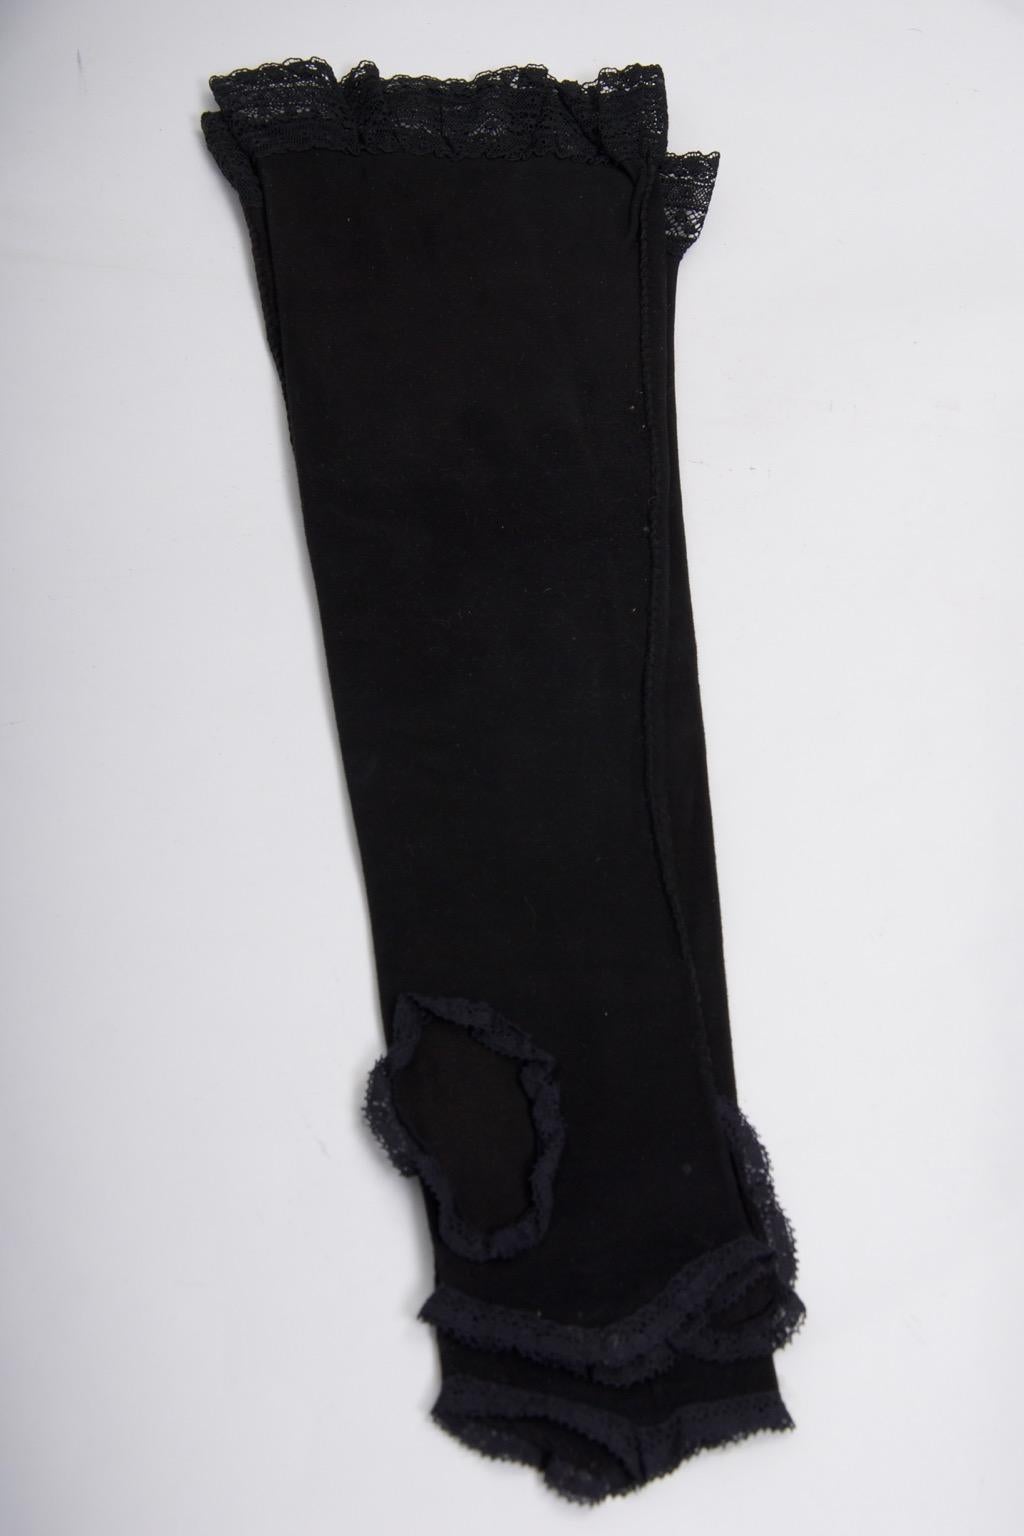 Black Suede Long Fingerless Gloves with Lace Trim 2